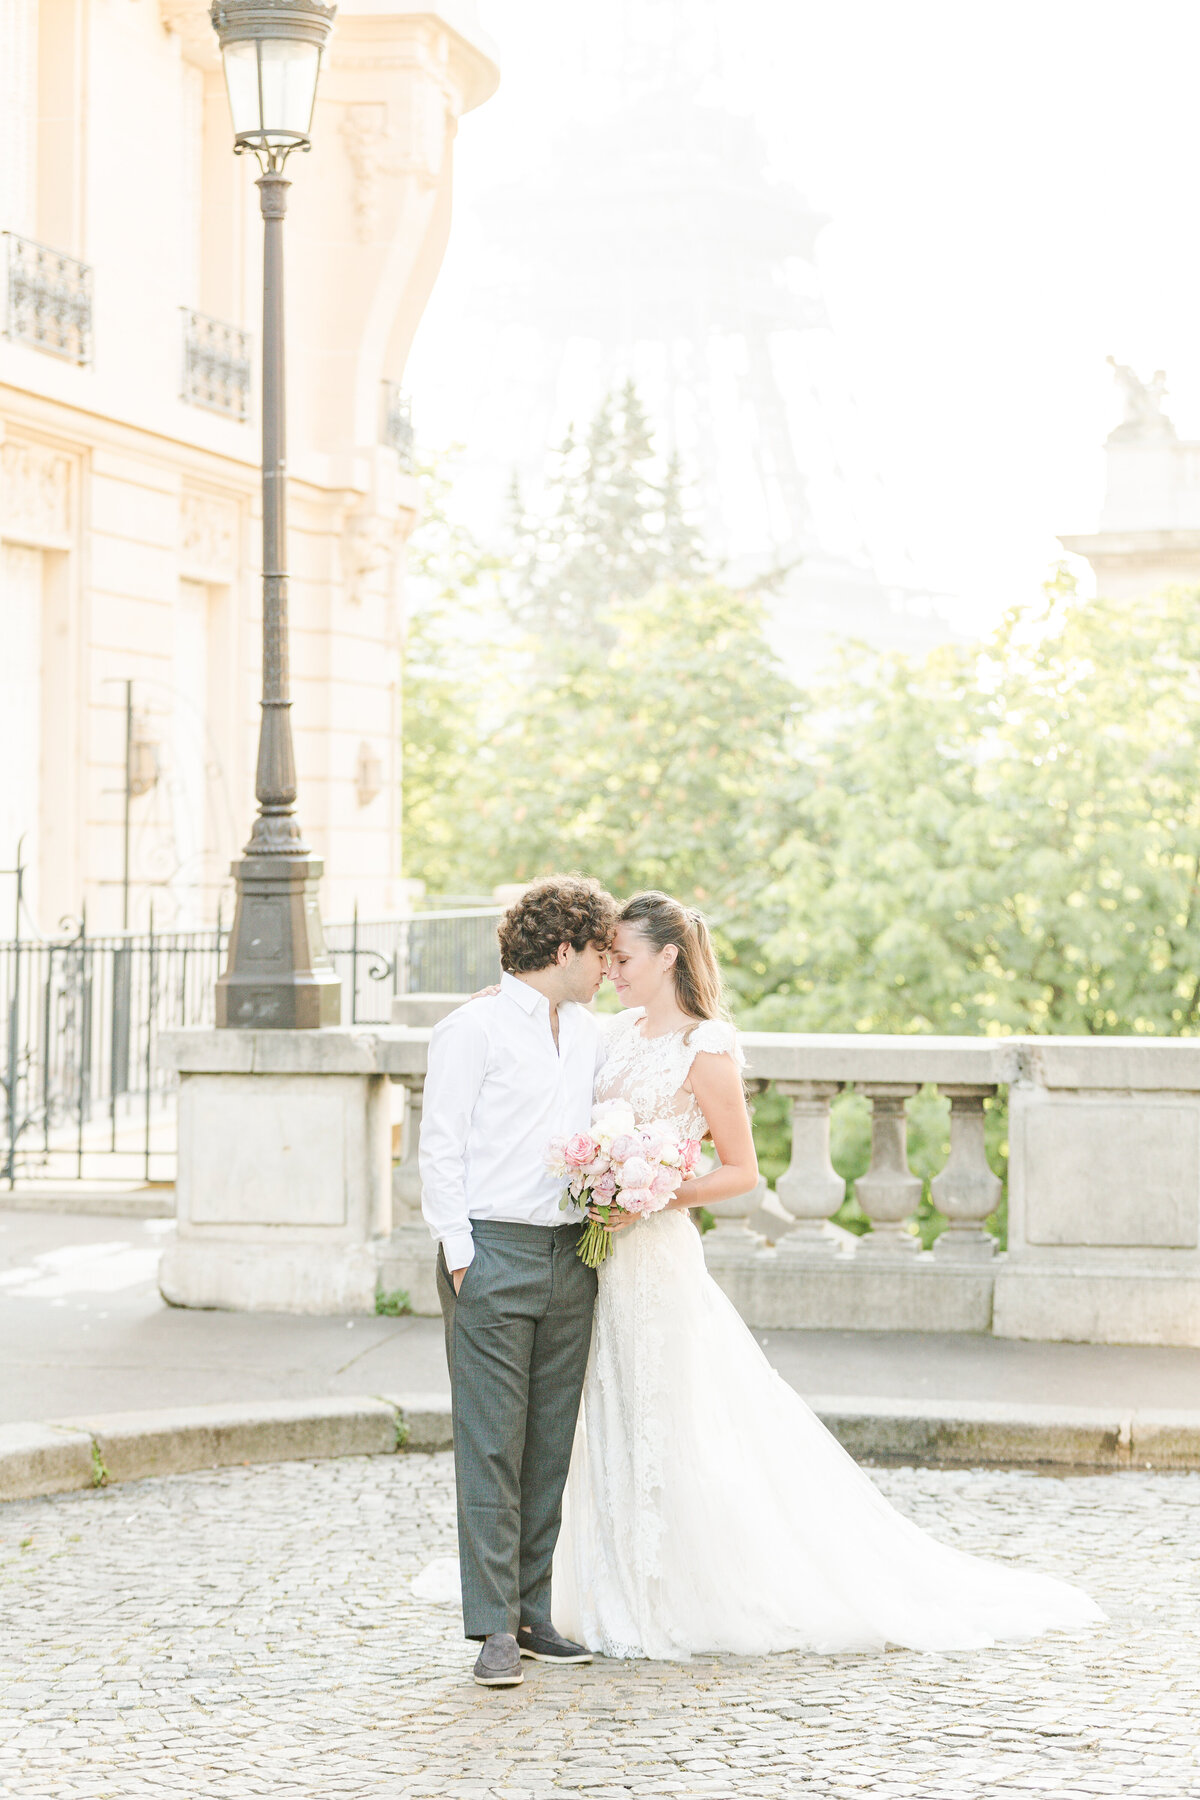 Bride and groom stand on the stone streets of Paris for an intimate wedding photo. Their bodies are pressed together and their foreheads touching. Captured by US-based destination wedding photographer Lia Rose Weddings